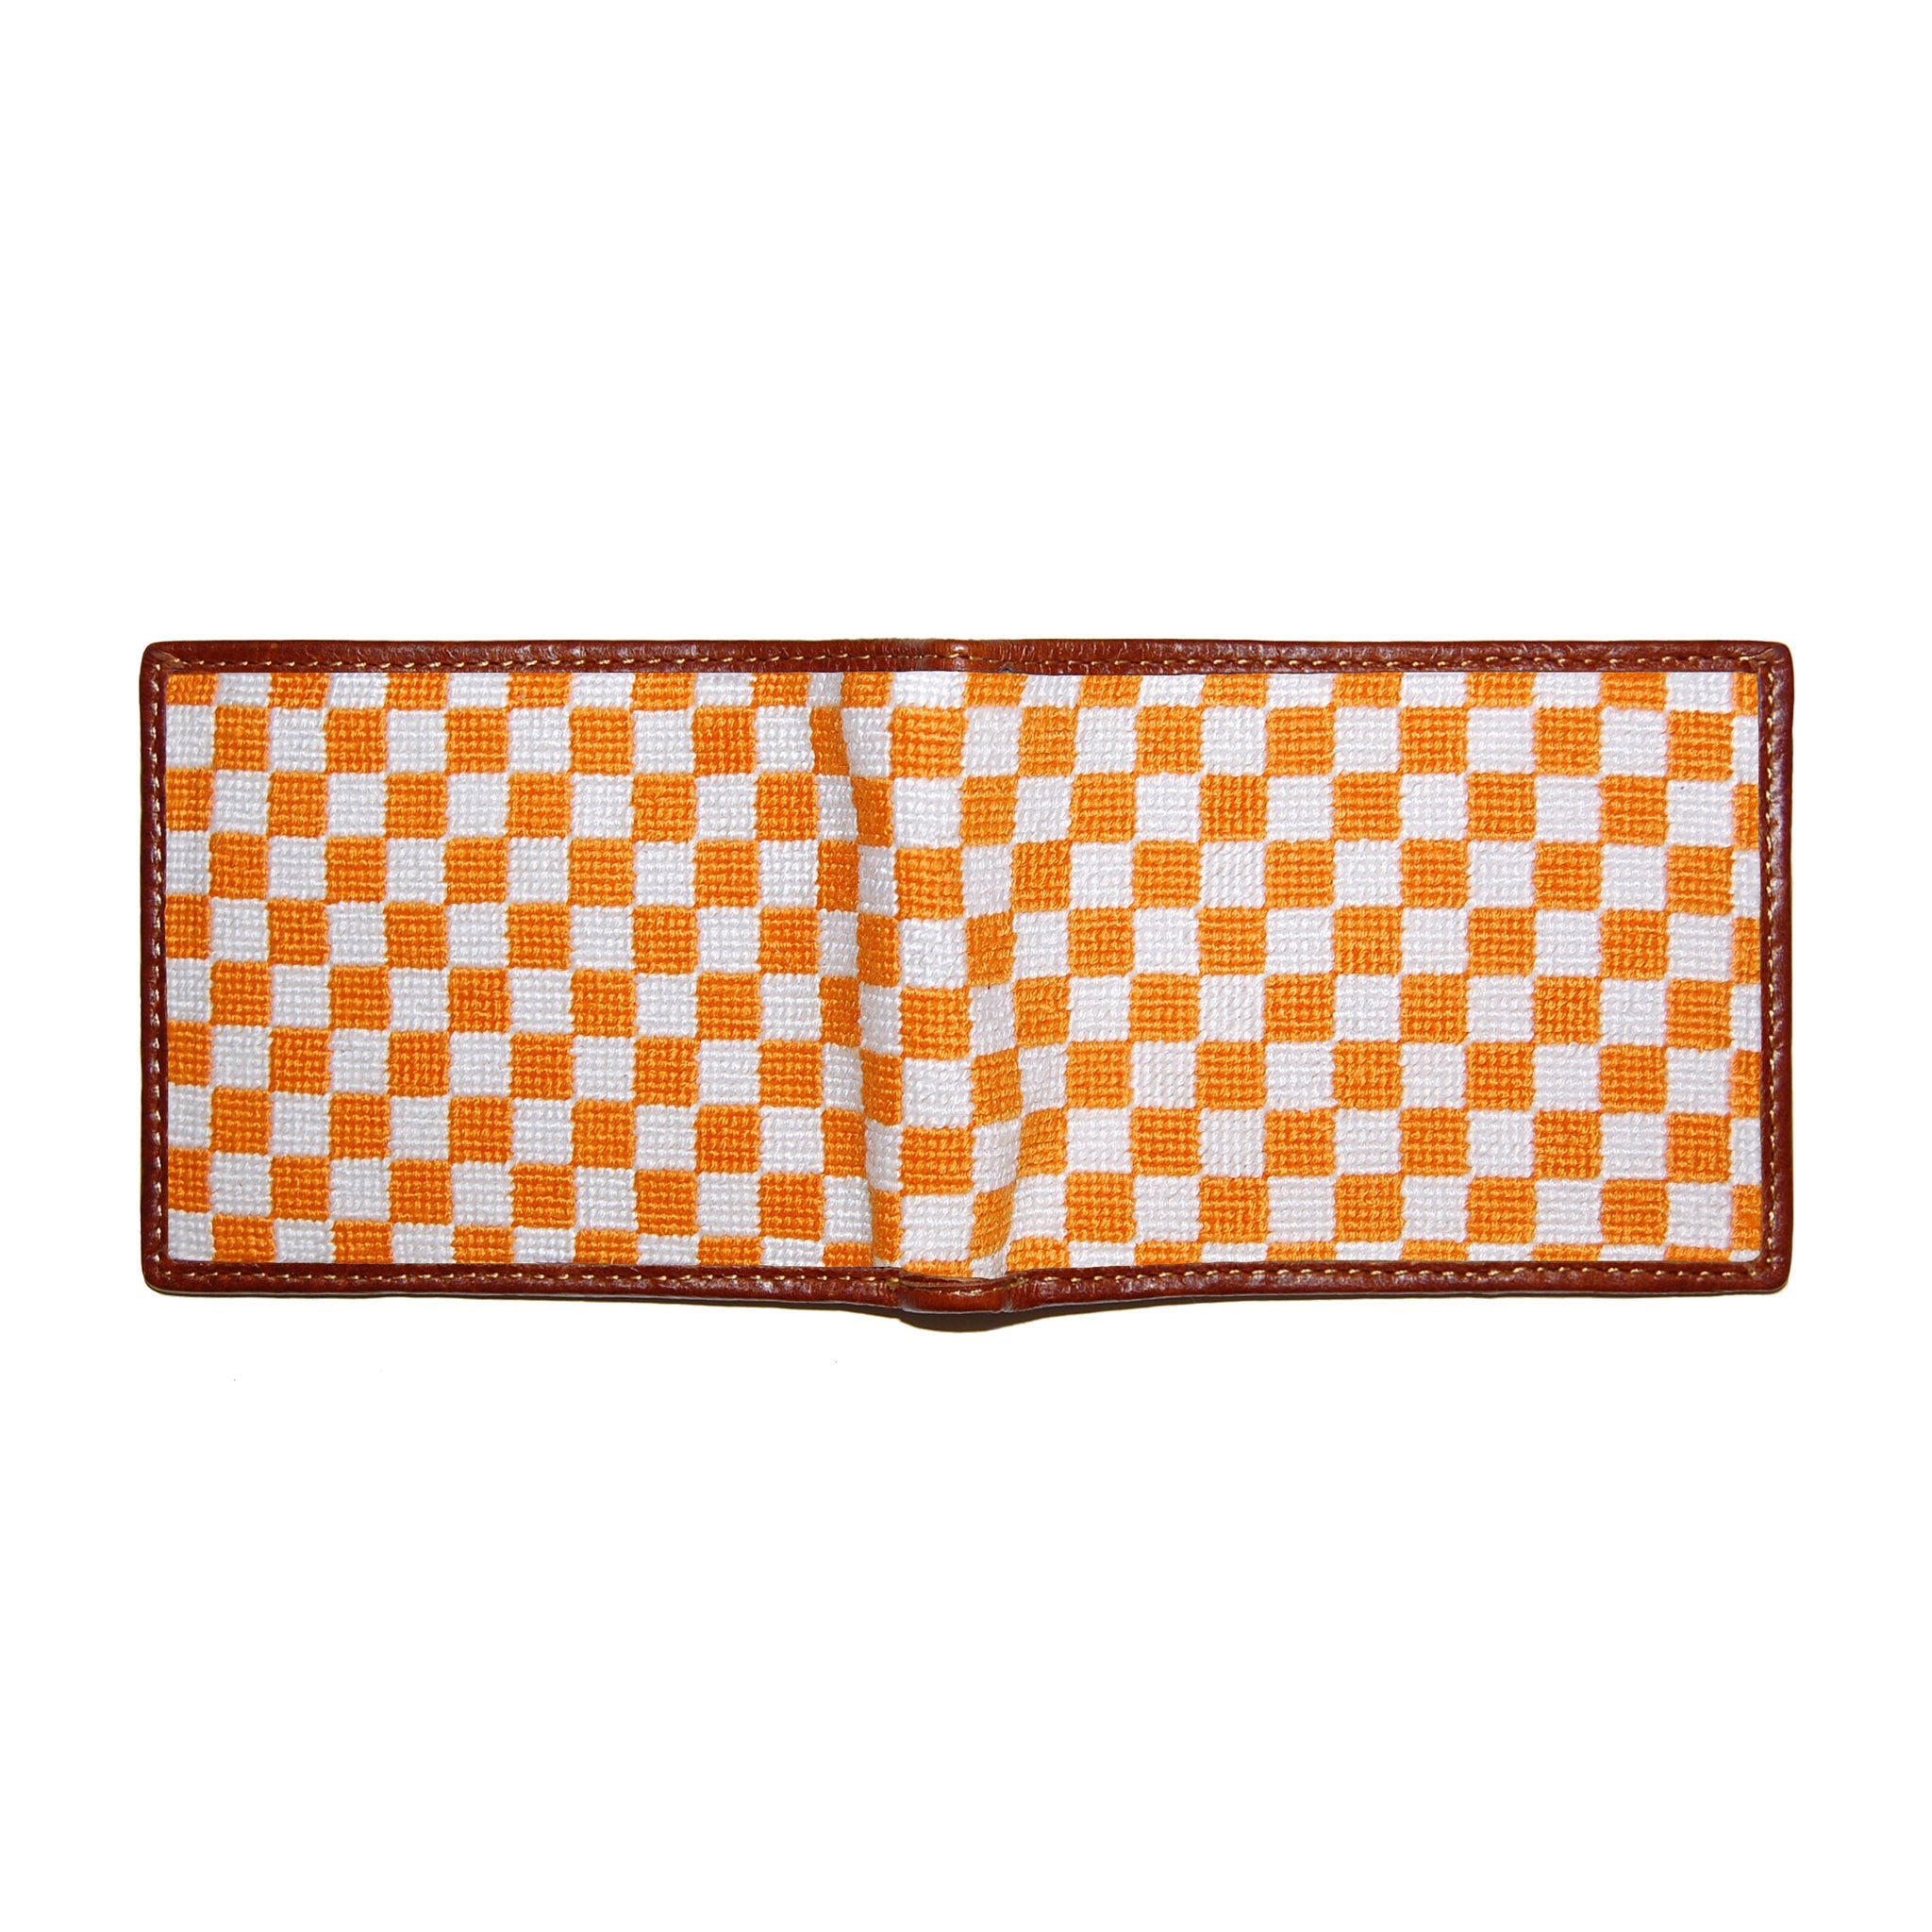 Smathers and Branson Tennessee Checker Needlepoint Bi-Fold Wallet 